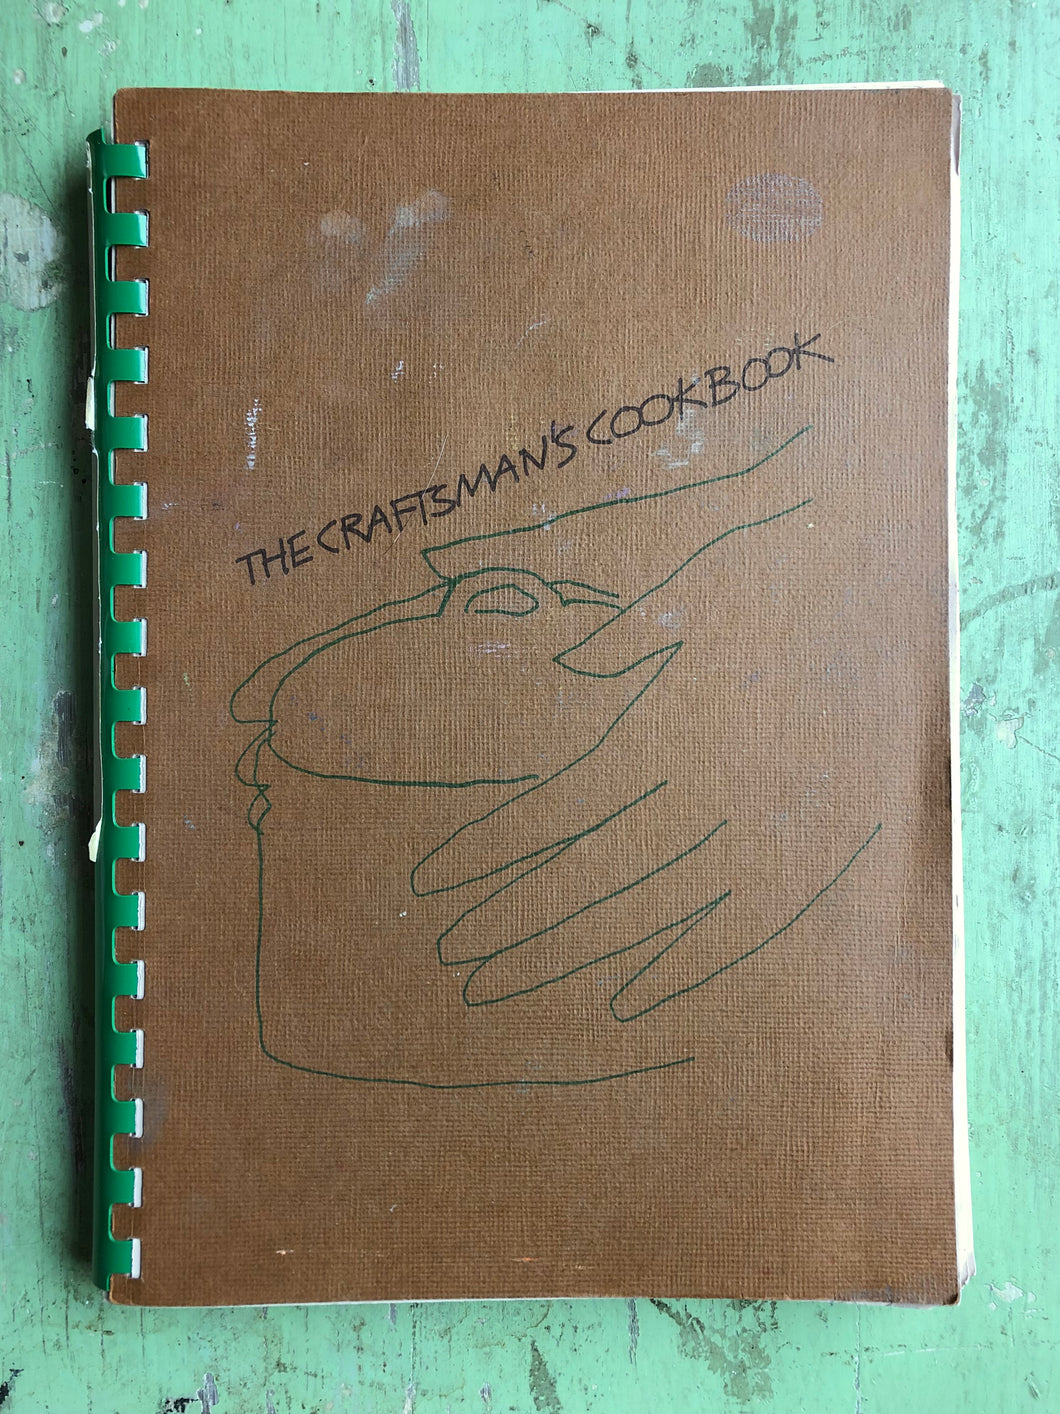 The Craftsman’s Cookbook. A Publication of the American Crafts Council compiled by Lois Moran